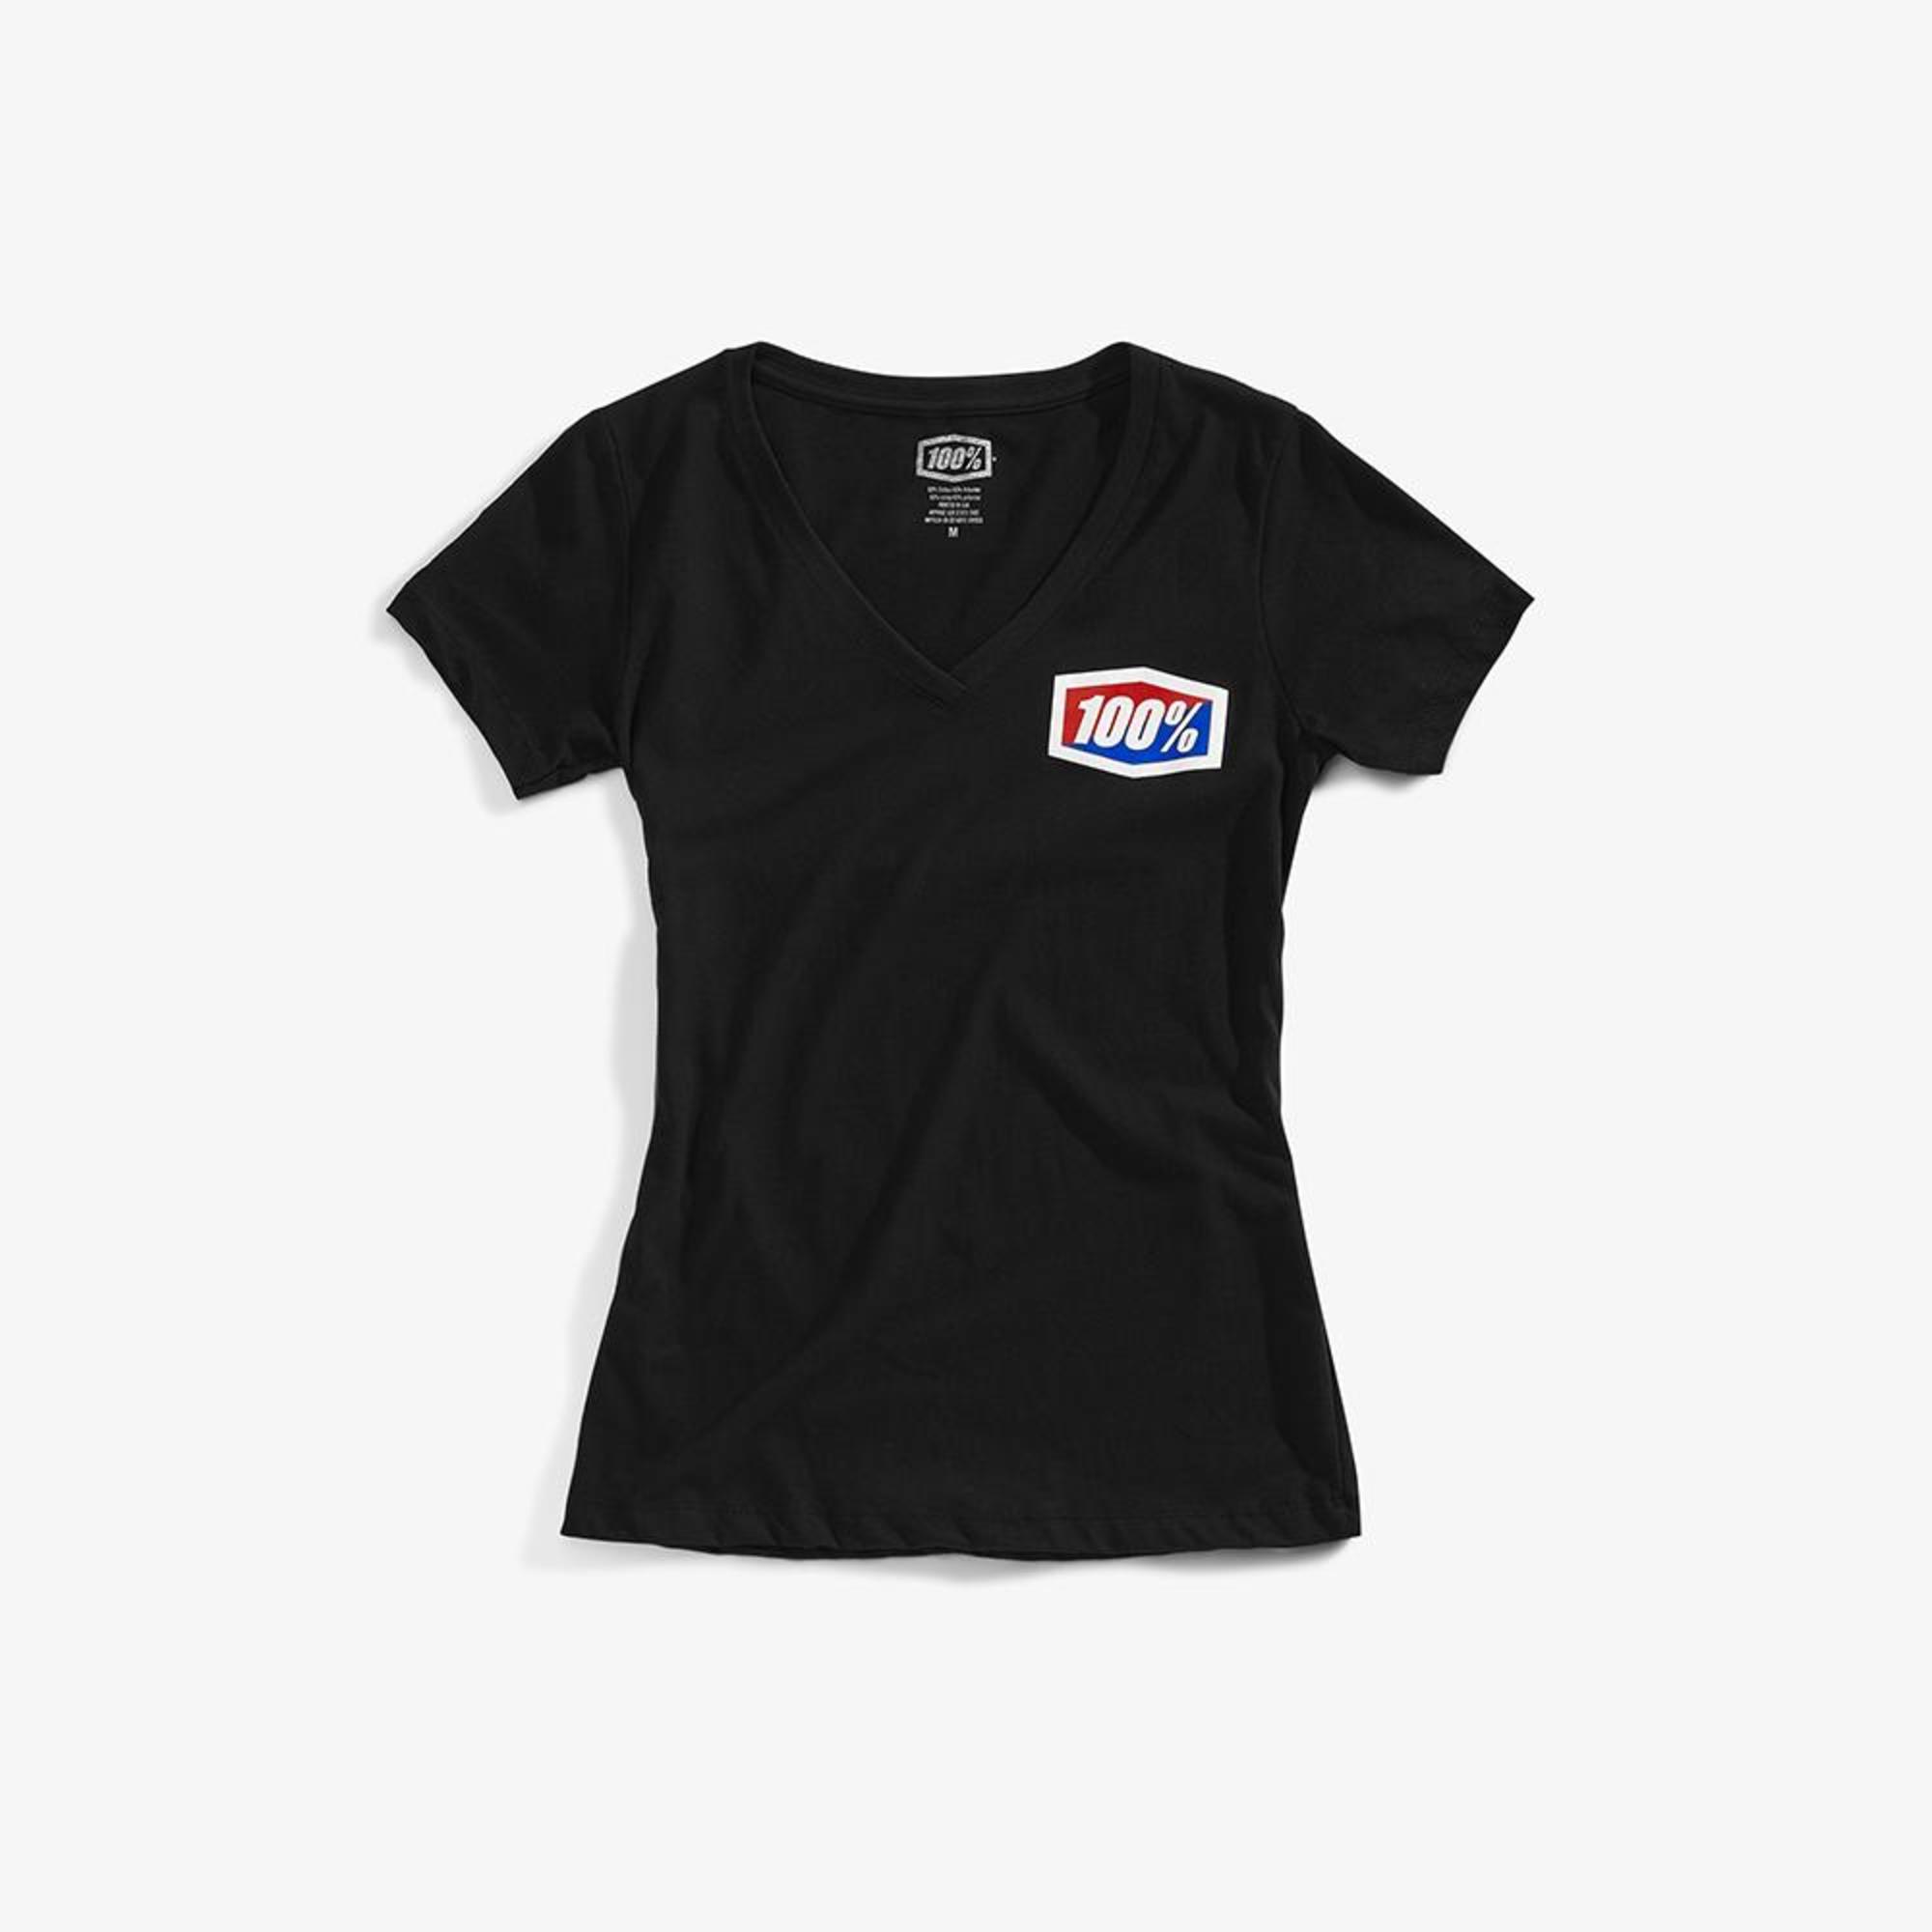 100 percent t-shirt shirts for womens official